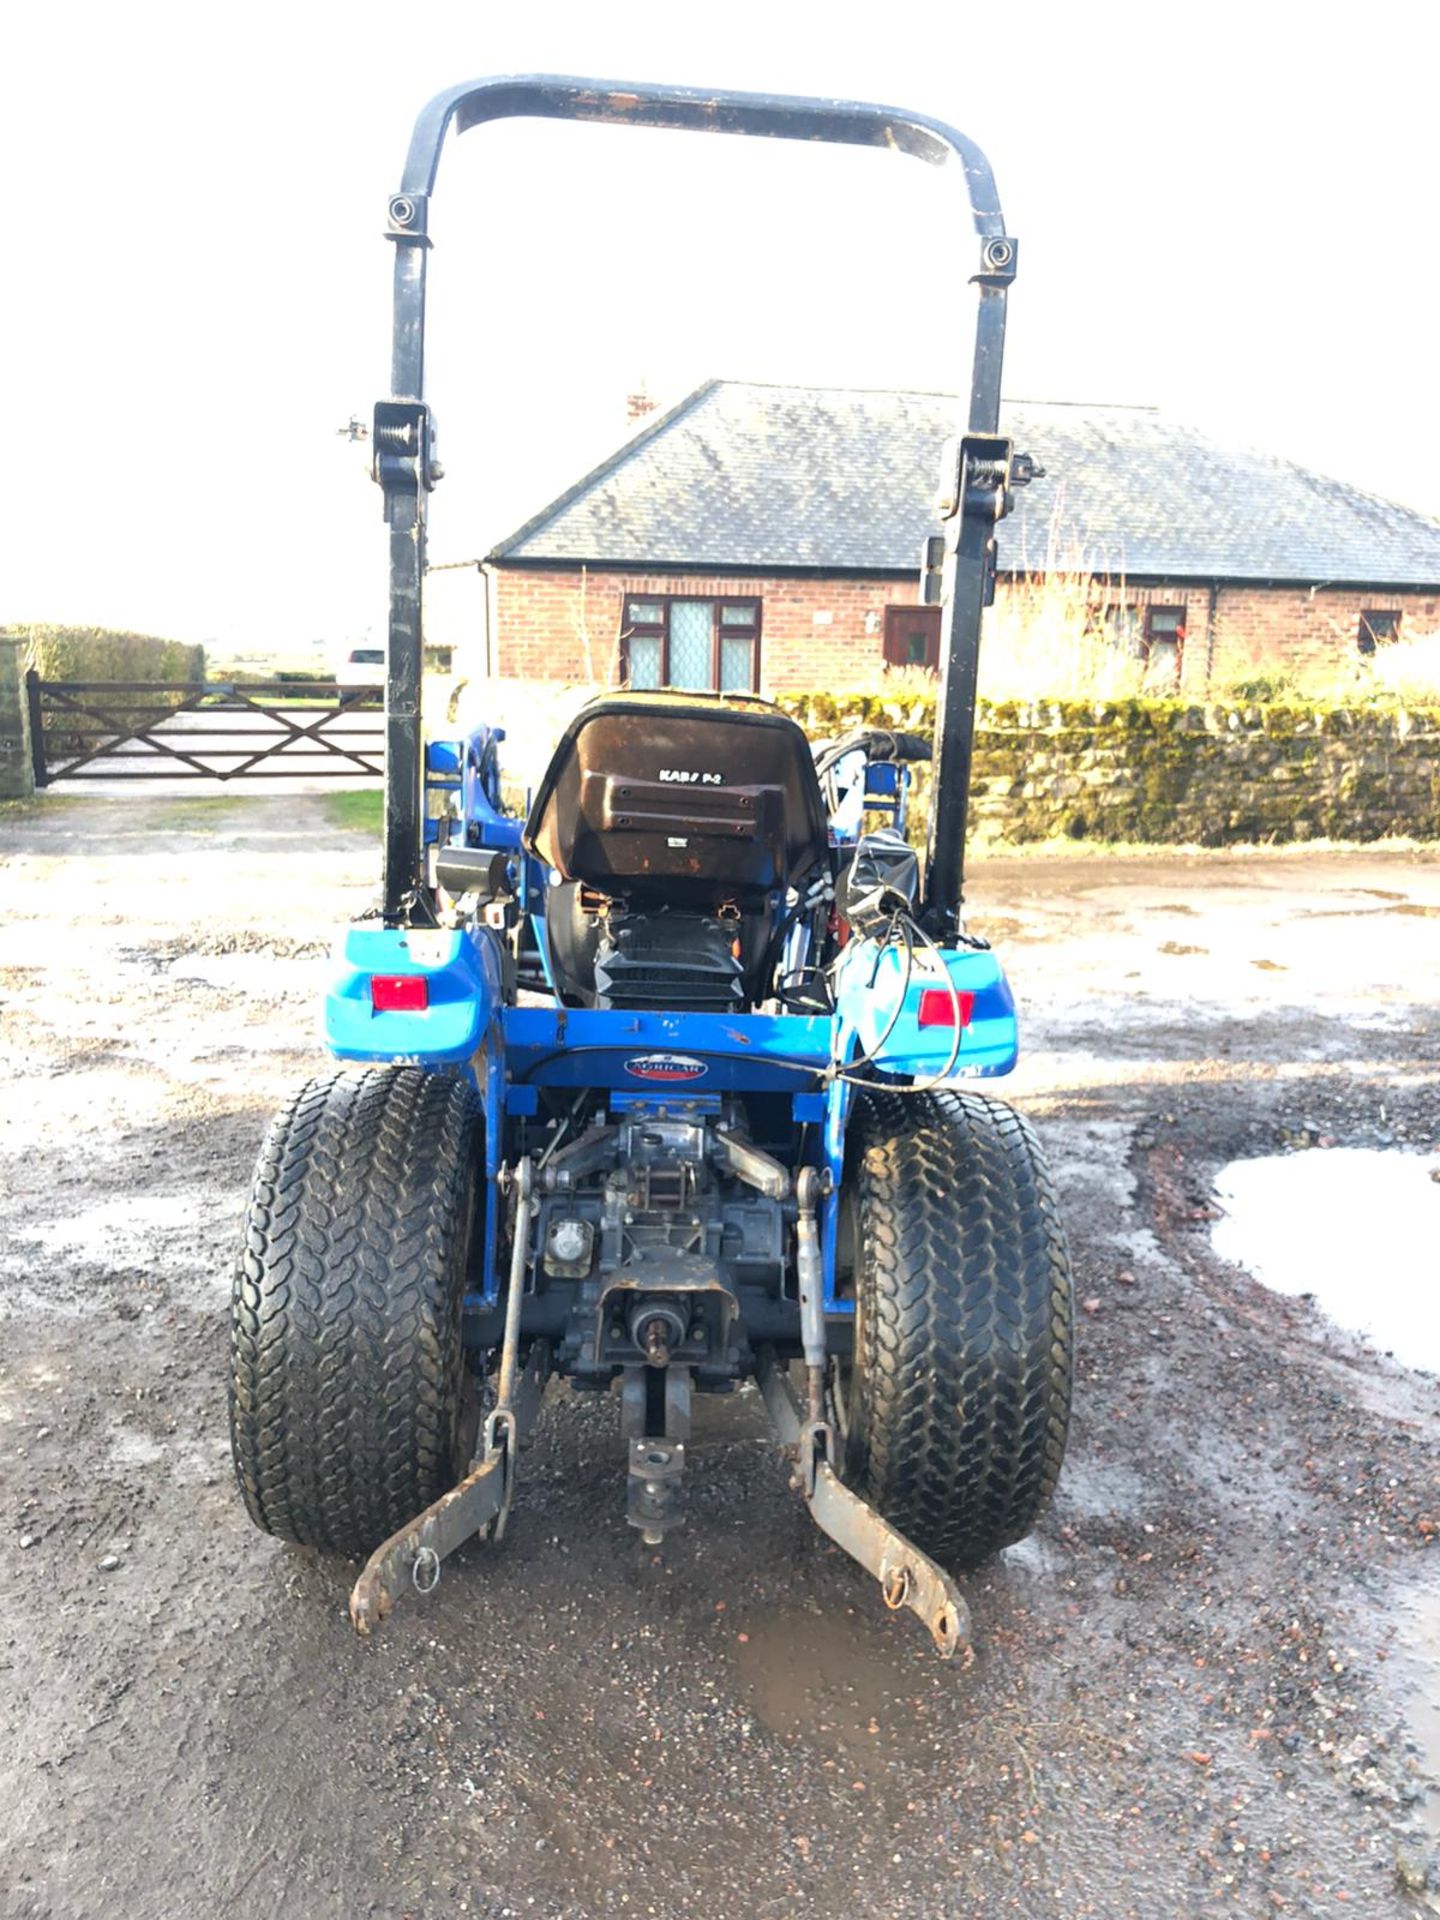 NEW HOLLAND TC21D COMPACT TRACTOR, C/W FRONT LOADER ATTACHMENT, RUNS, DRIVES AND LIFTS *PLUS VAT* - Image 2 of 6